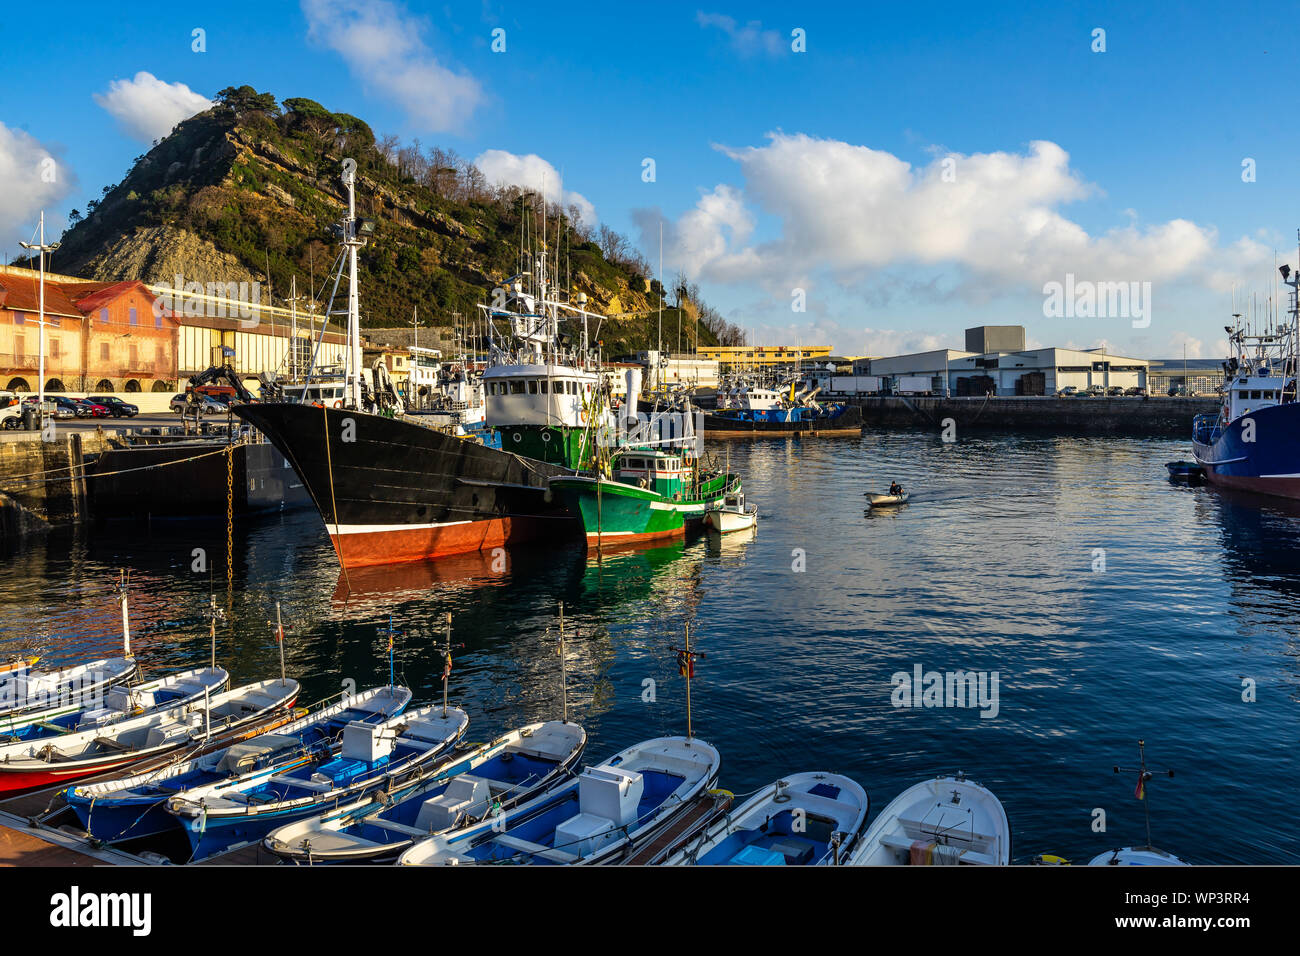 View of Getaria port, a typical fishing town in Gipuzkoa province, Basque Country, Spain Stock Photo